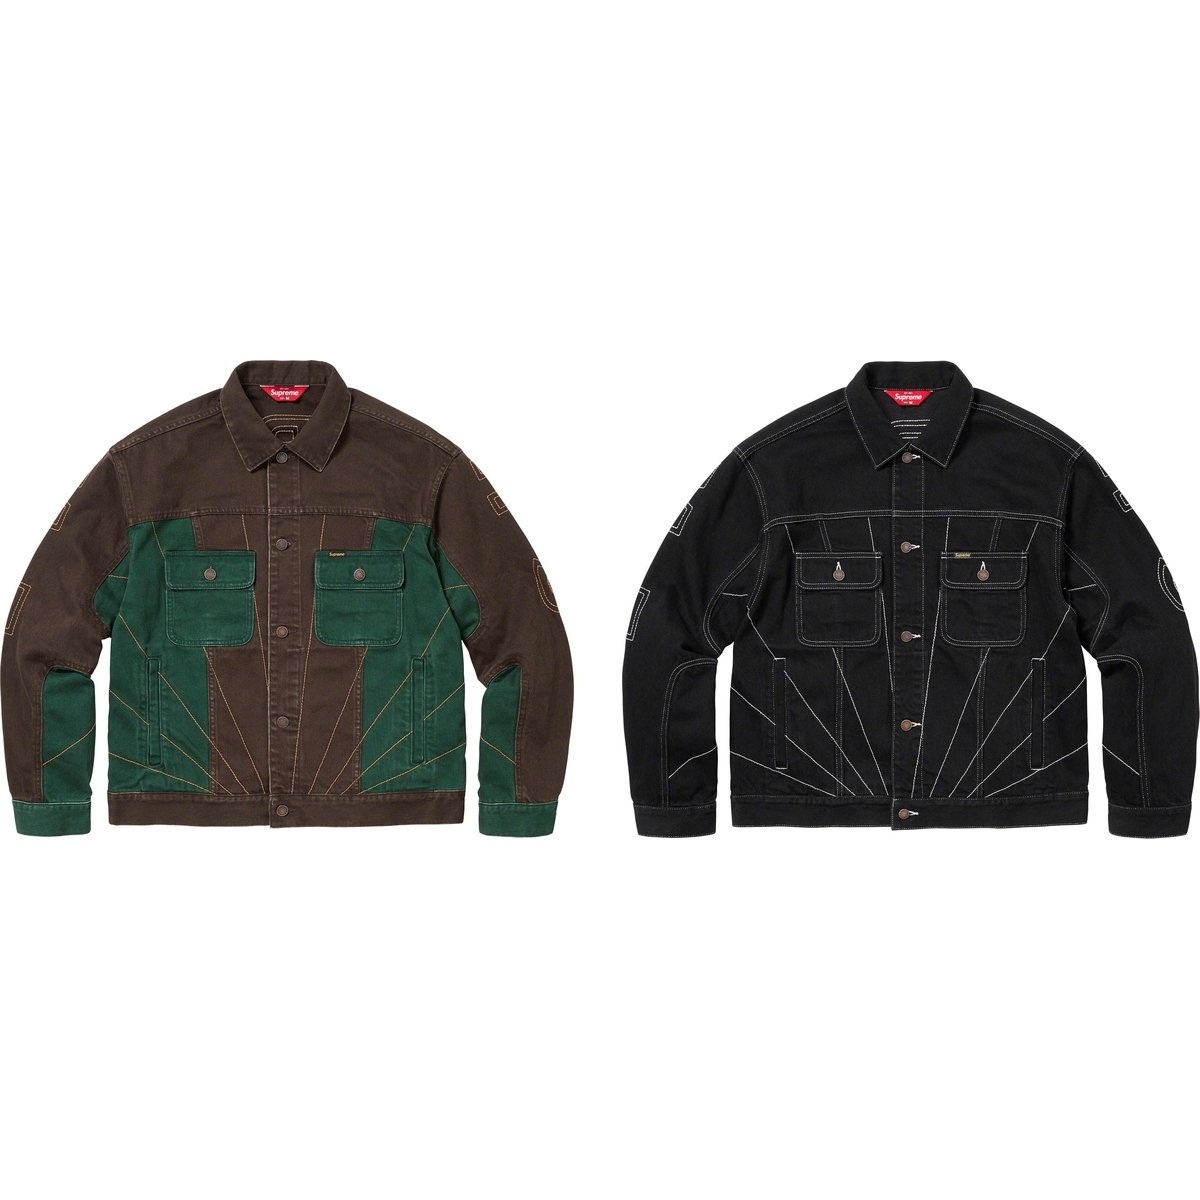 Supreme Radial Embroidered Denim Trucker Jacket released during fall winter 23 season